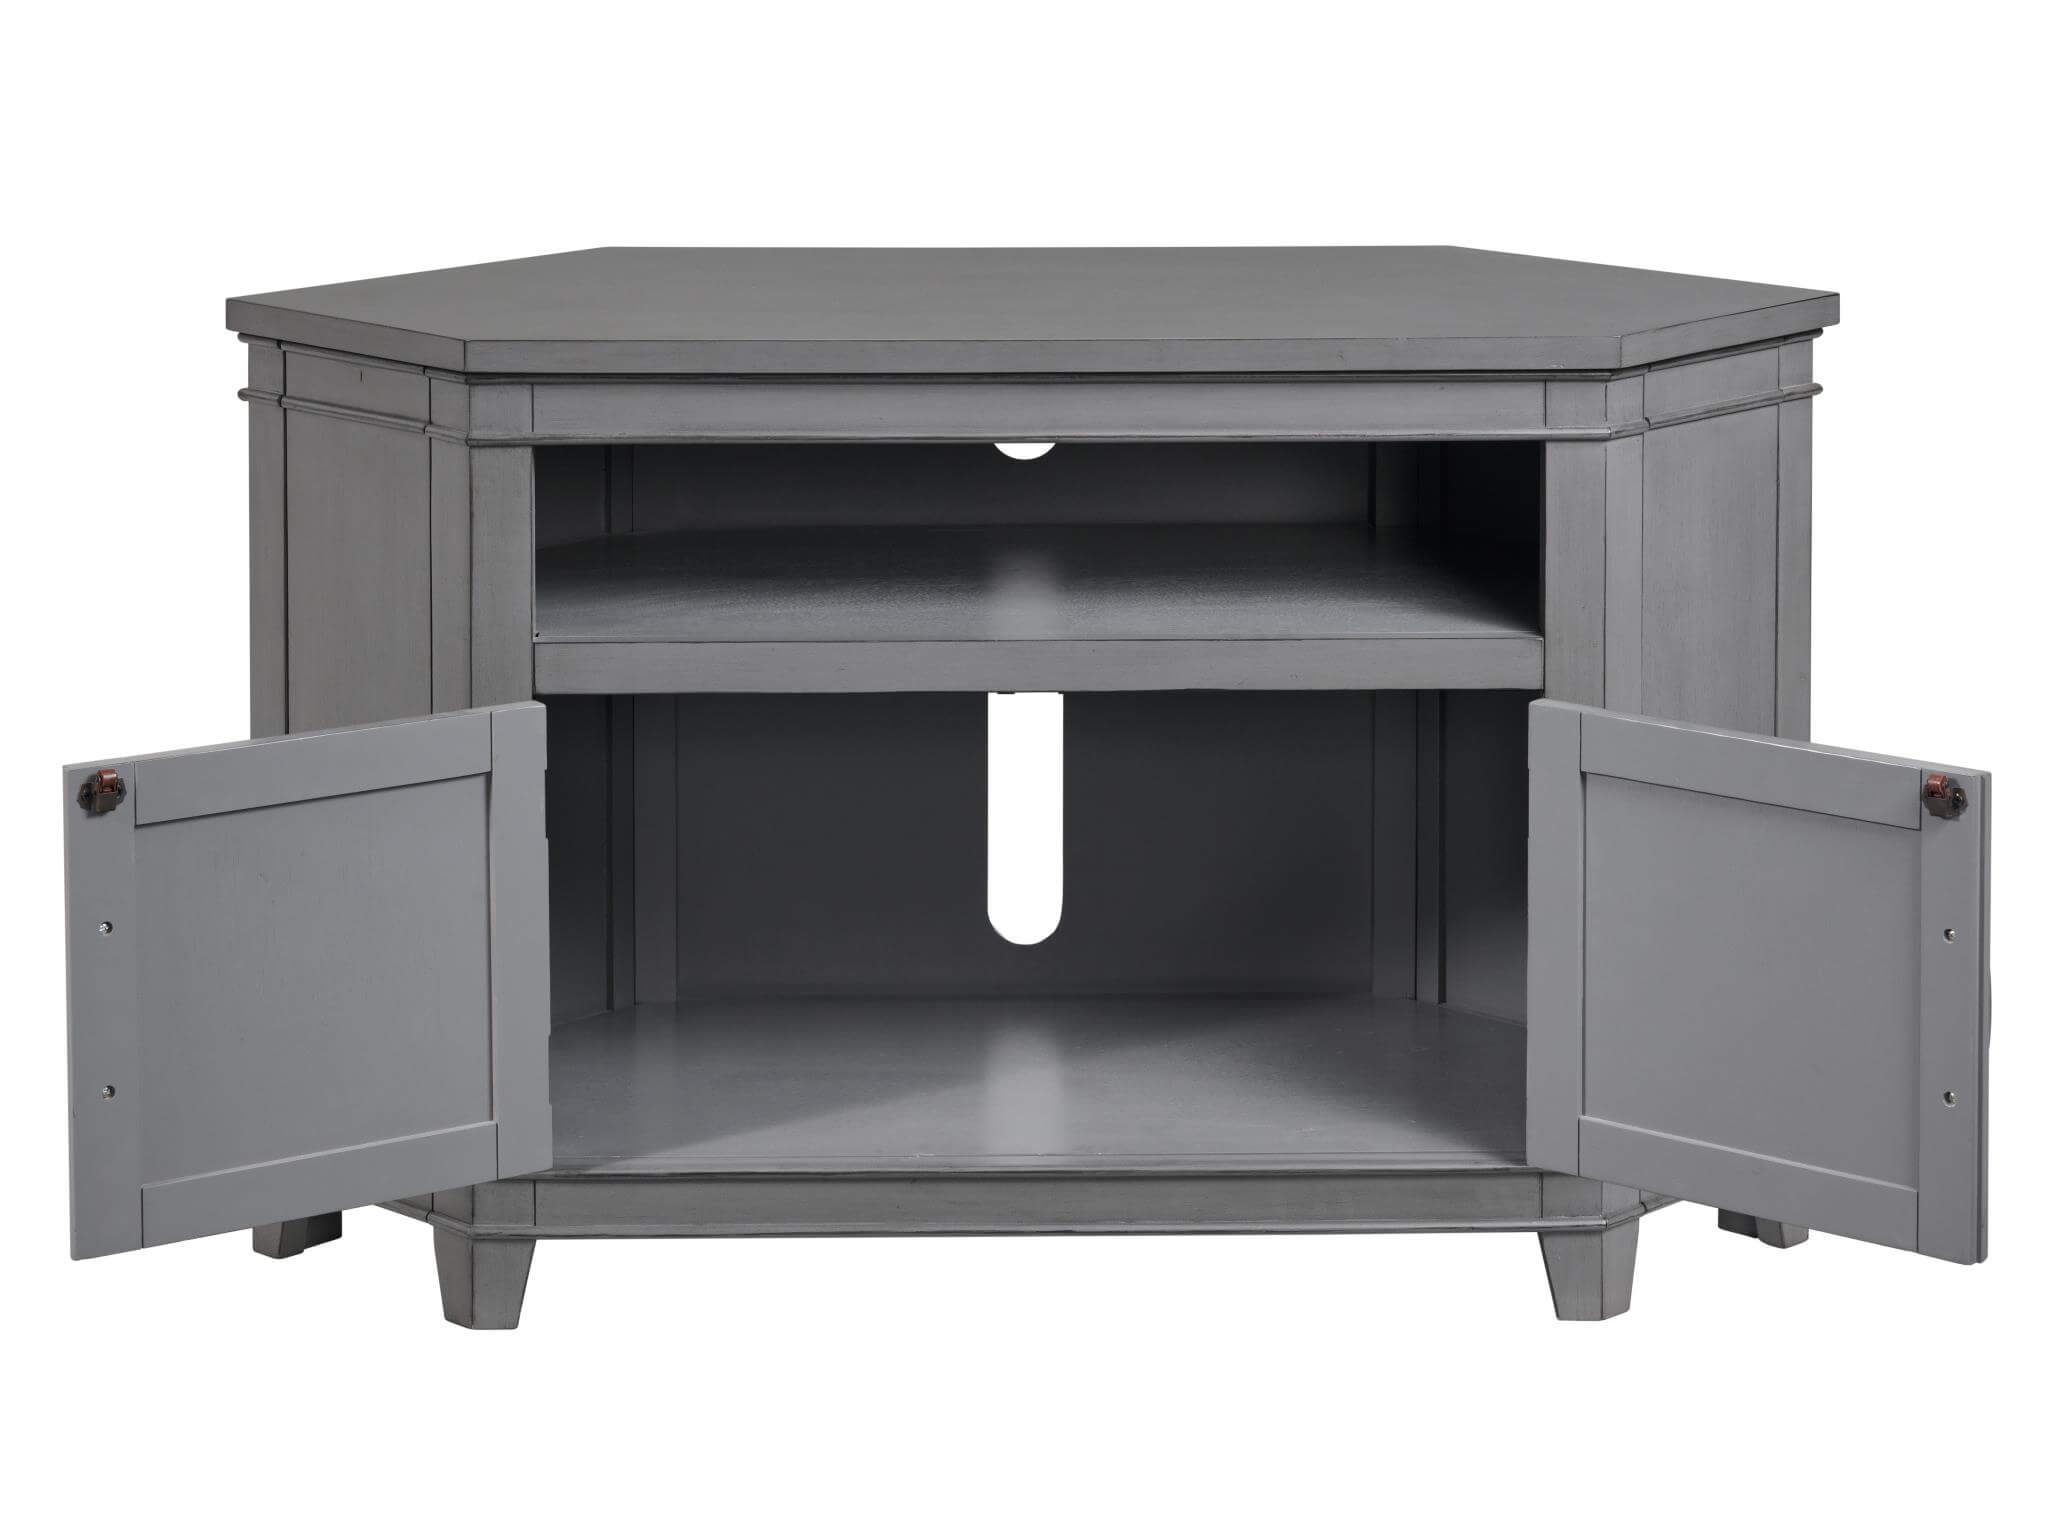 Del Mar 50" Corner TV Stand in Grey Finish By Martin Svensson cabinets open product image